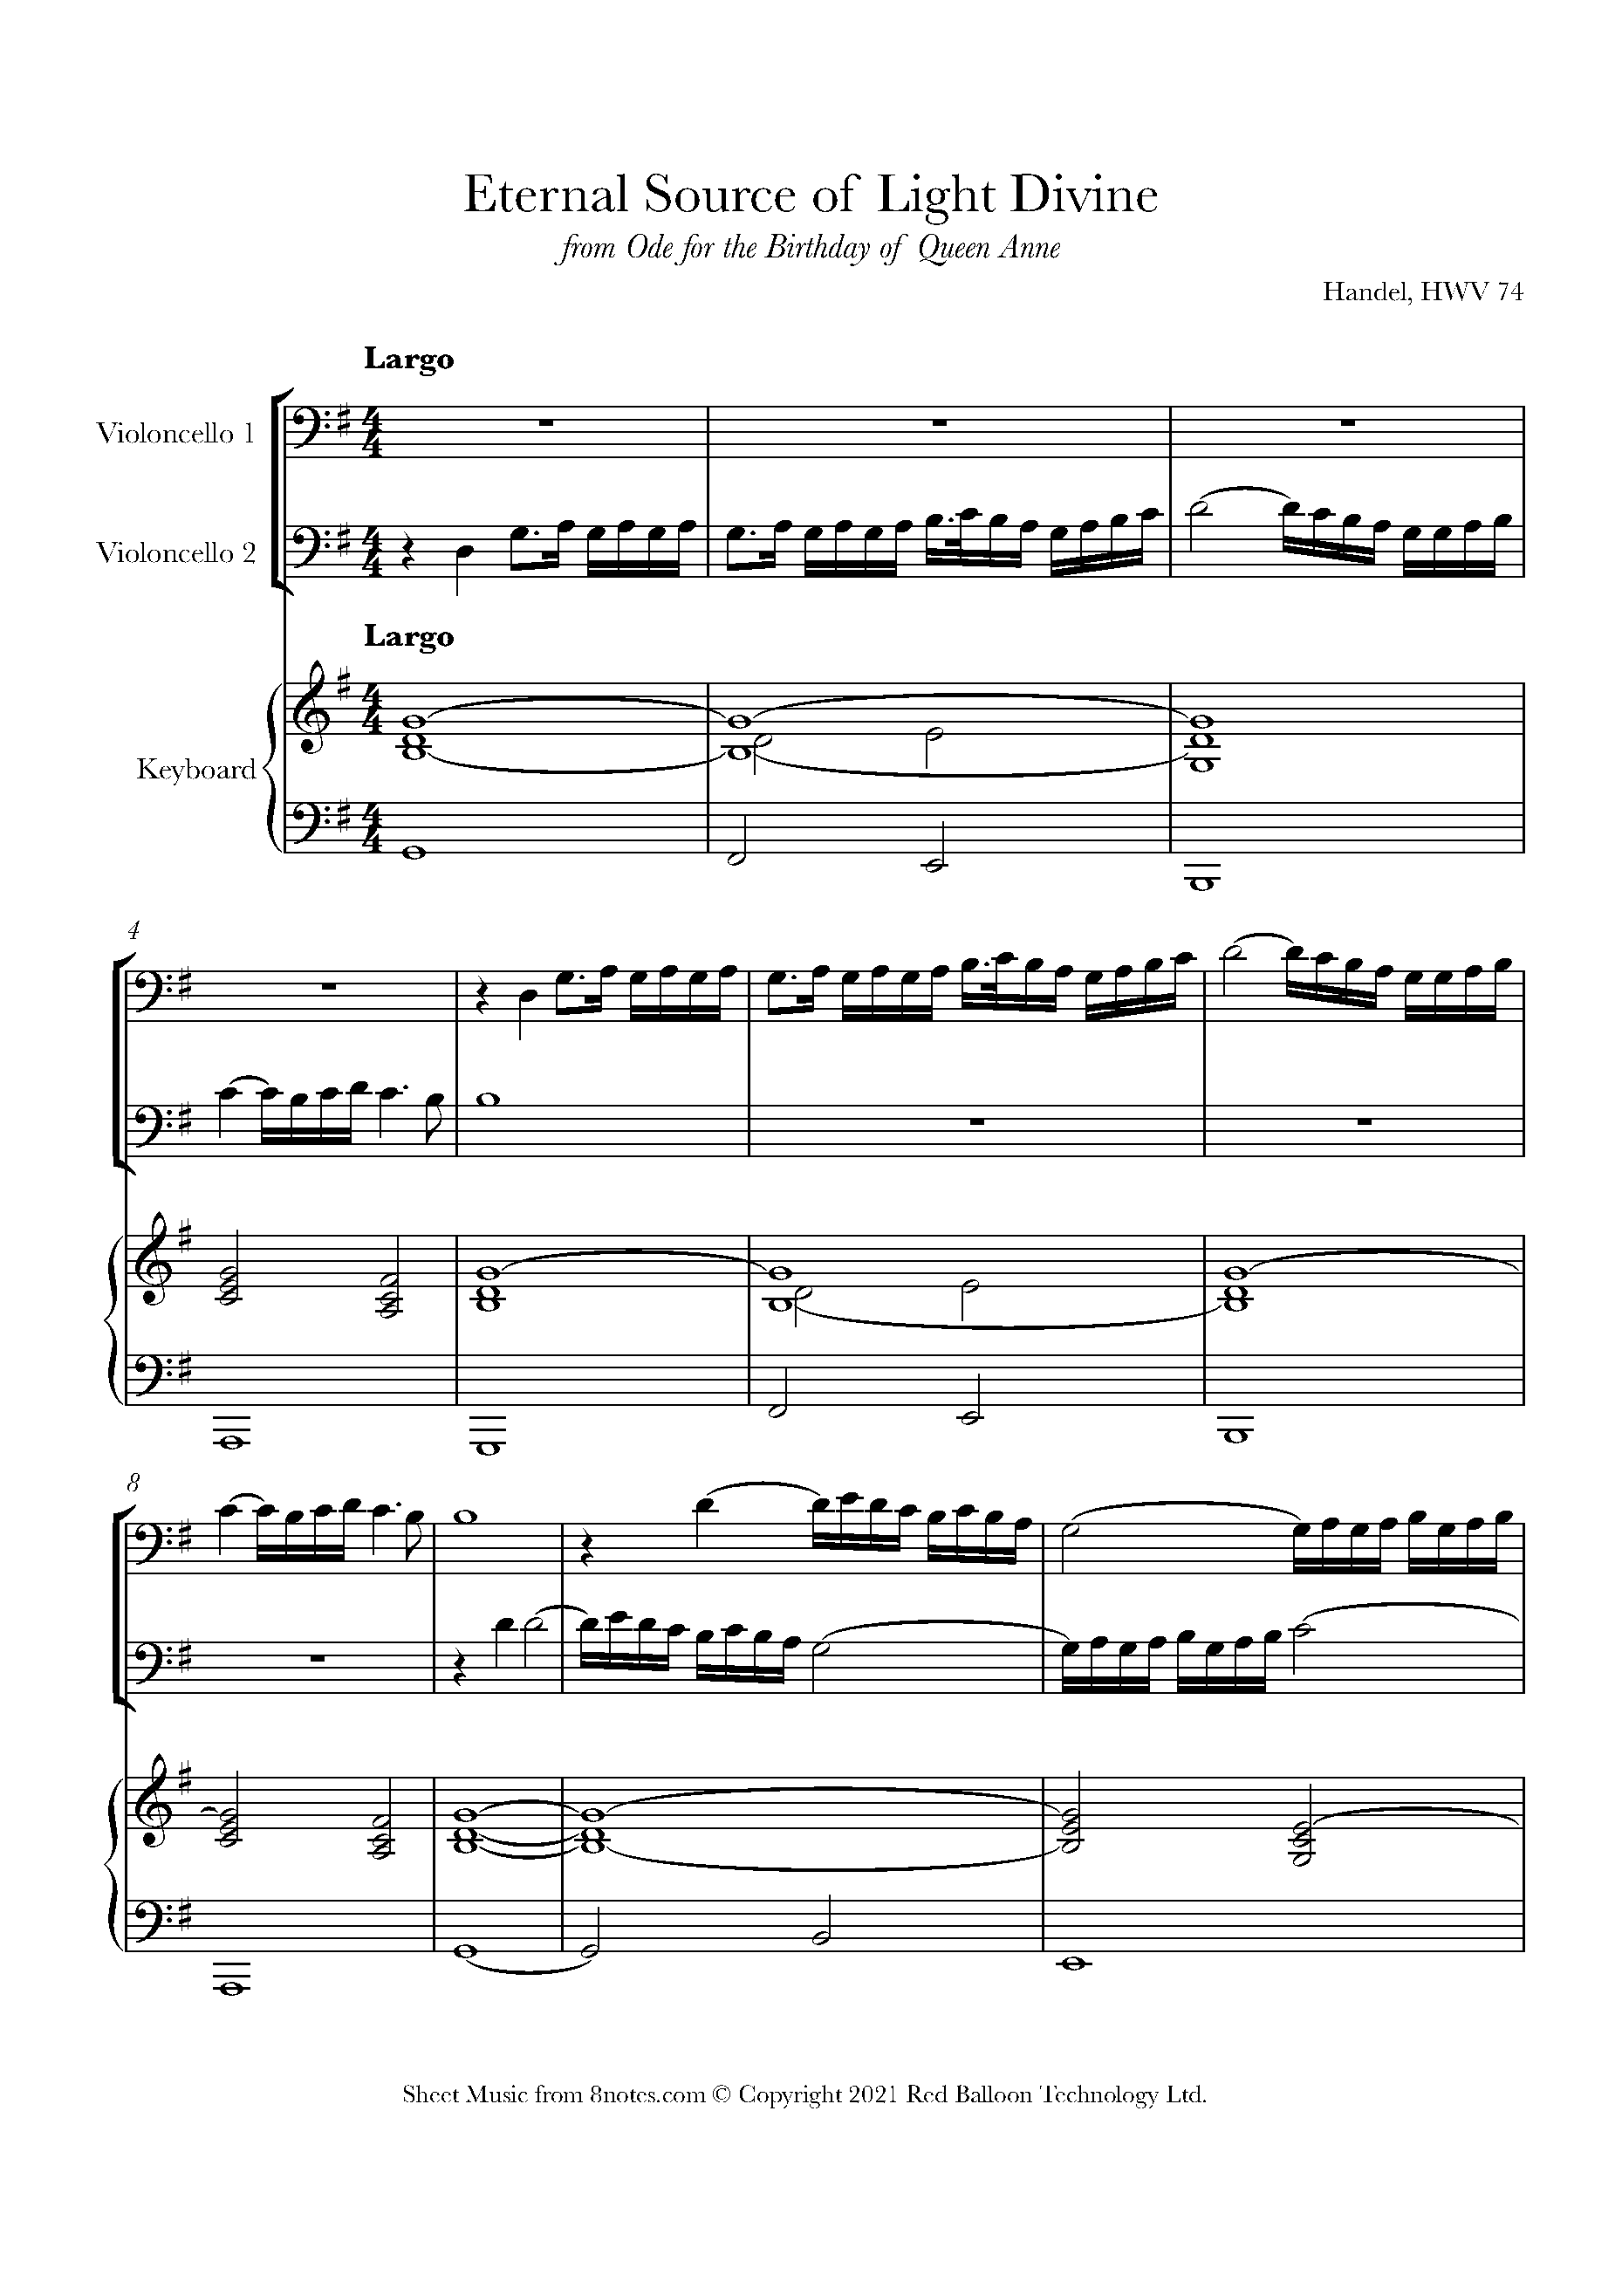 Handel, George Frideric - Eternal Source of Light Divine (No. from Ode for the Birthday of Queen Anne, HWV 74) Sheet music for Cello Duet - 8notes.com